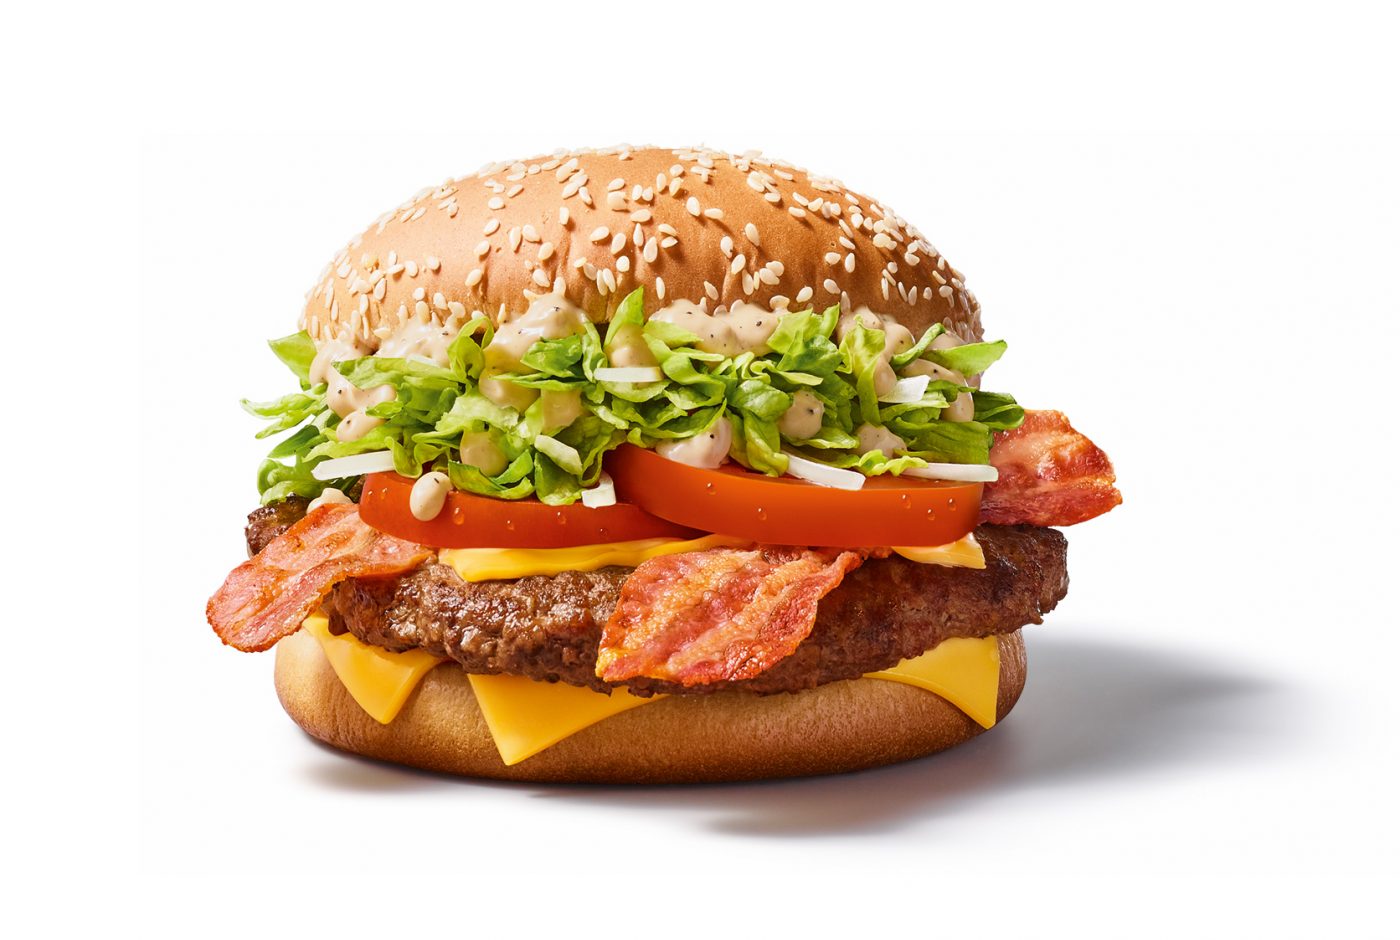 Mc Donald's Promotion Oktoberfest 2019, a big Big Tasty Bacon Cheeseburger stands on a white background